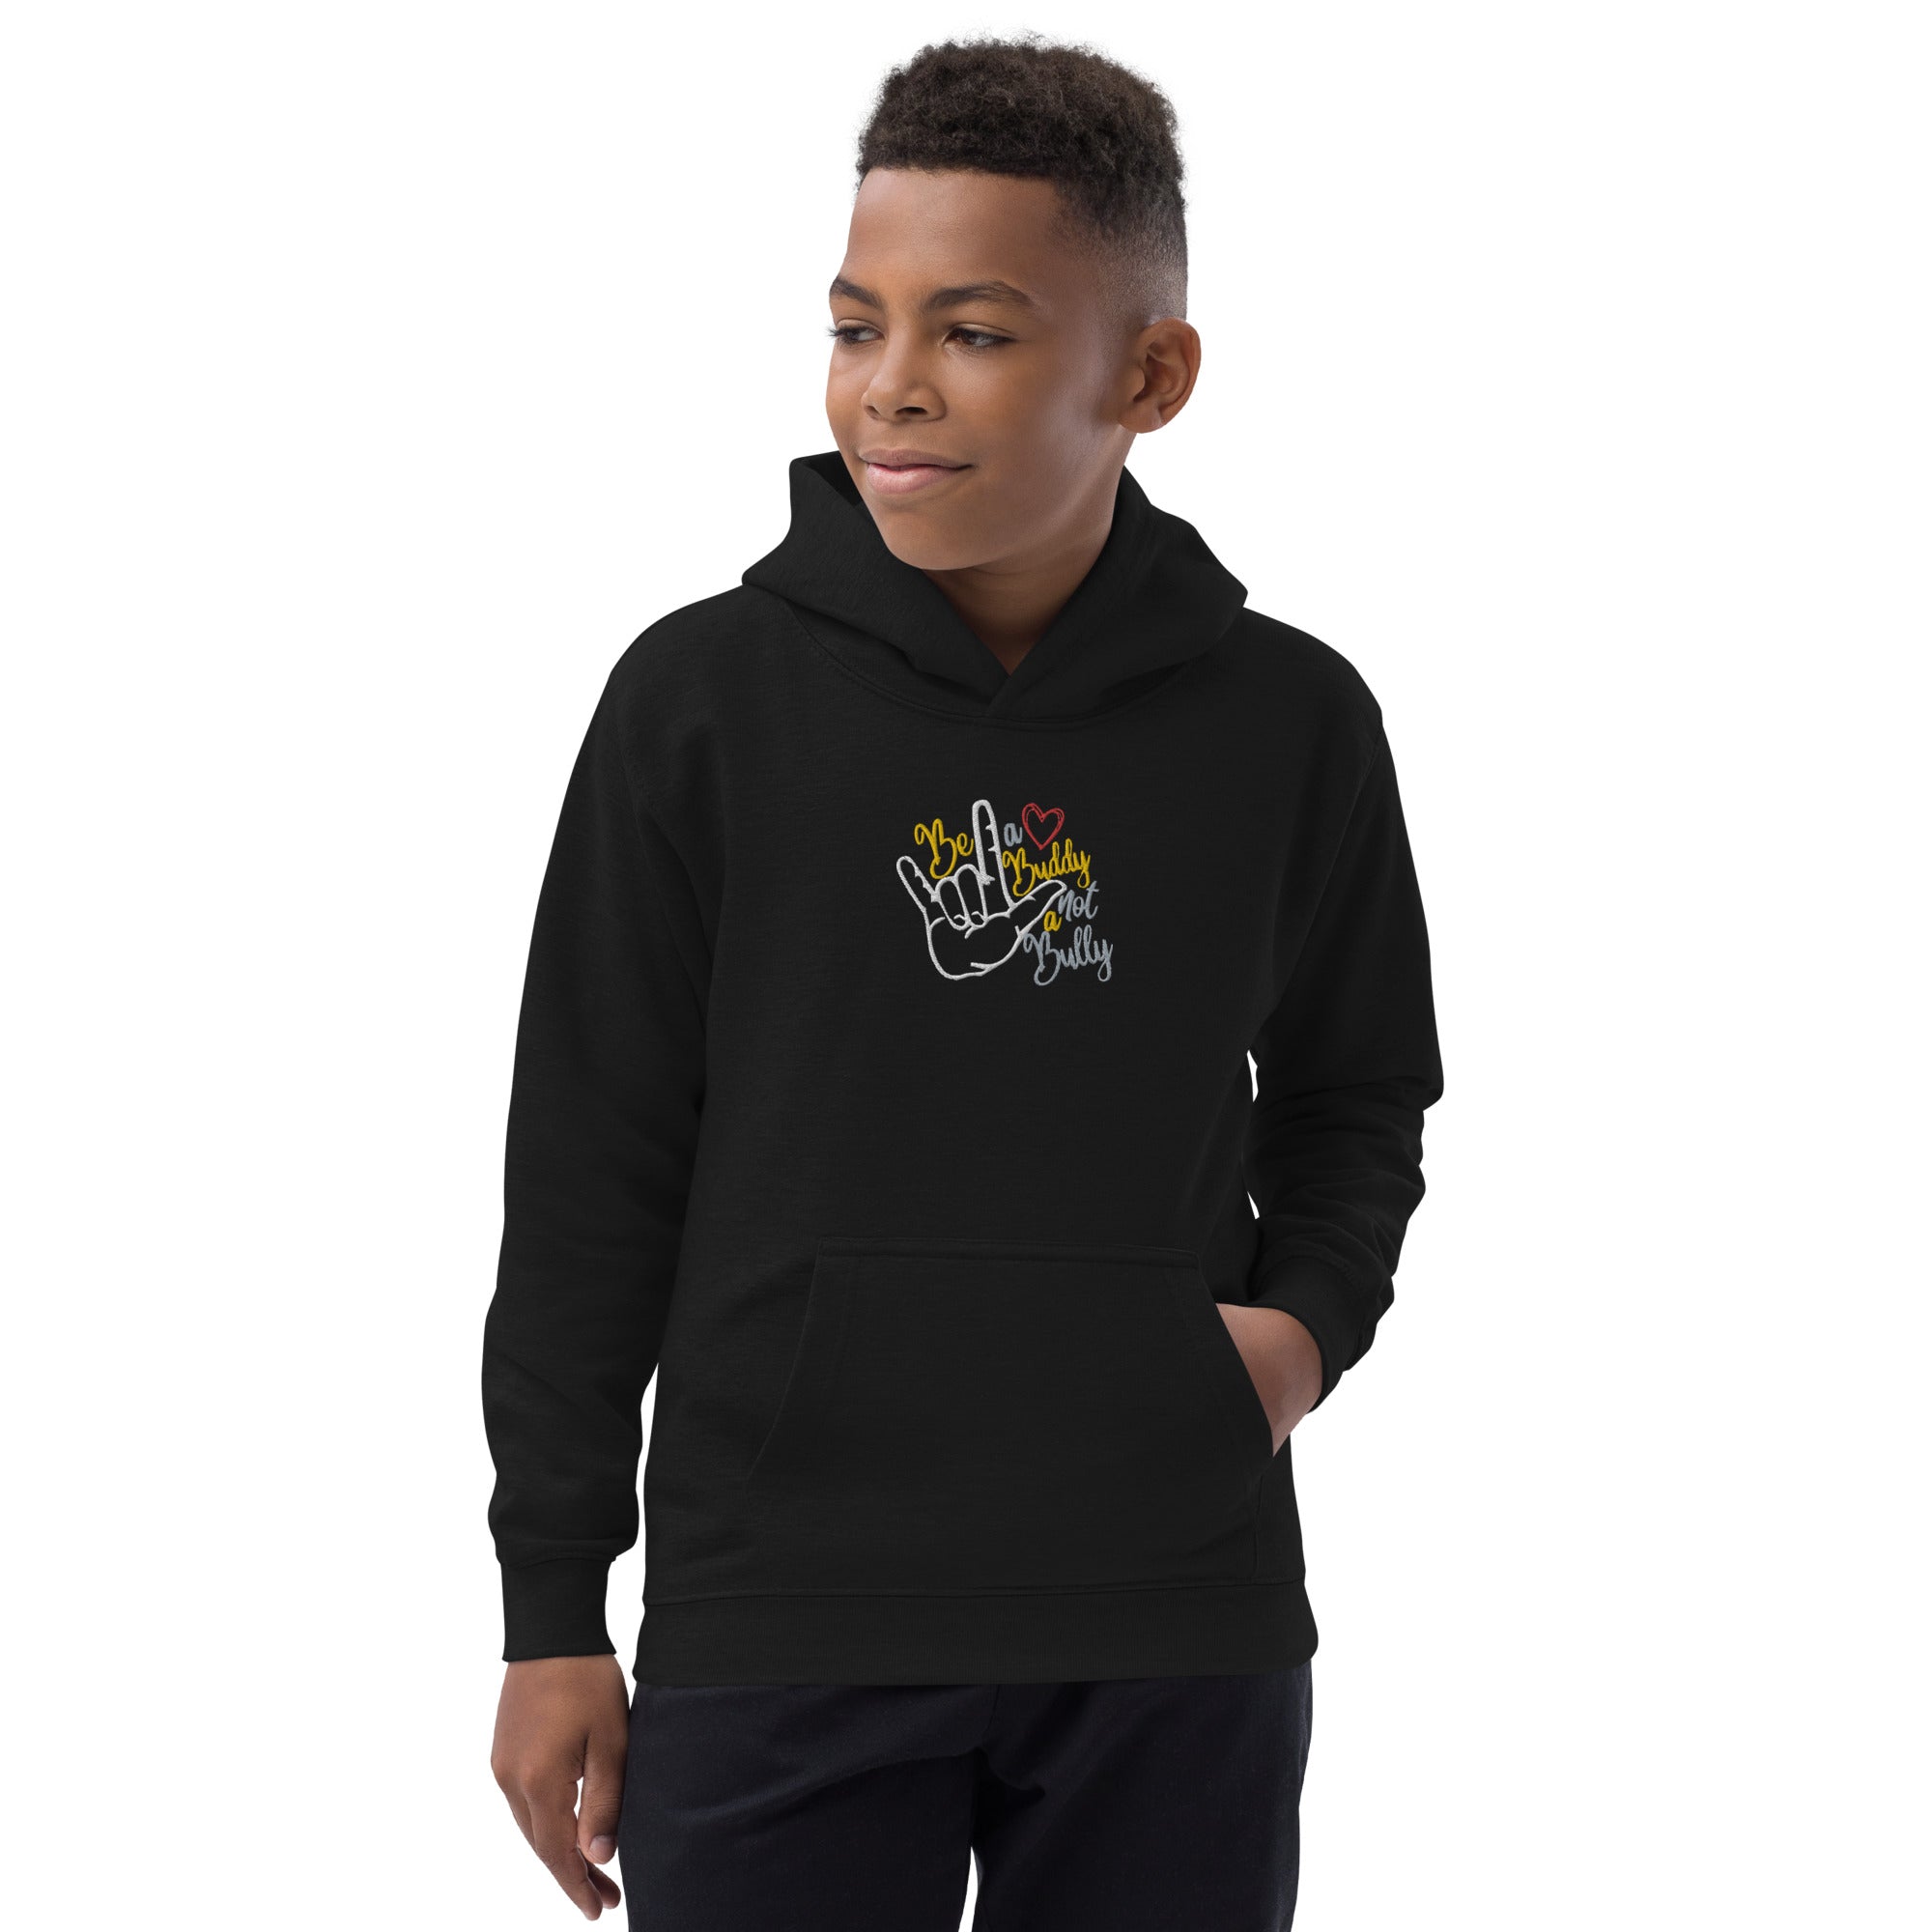 Be a Buddy Not a Bully Kids Hoodie